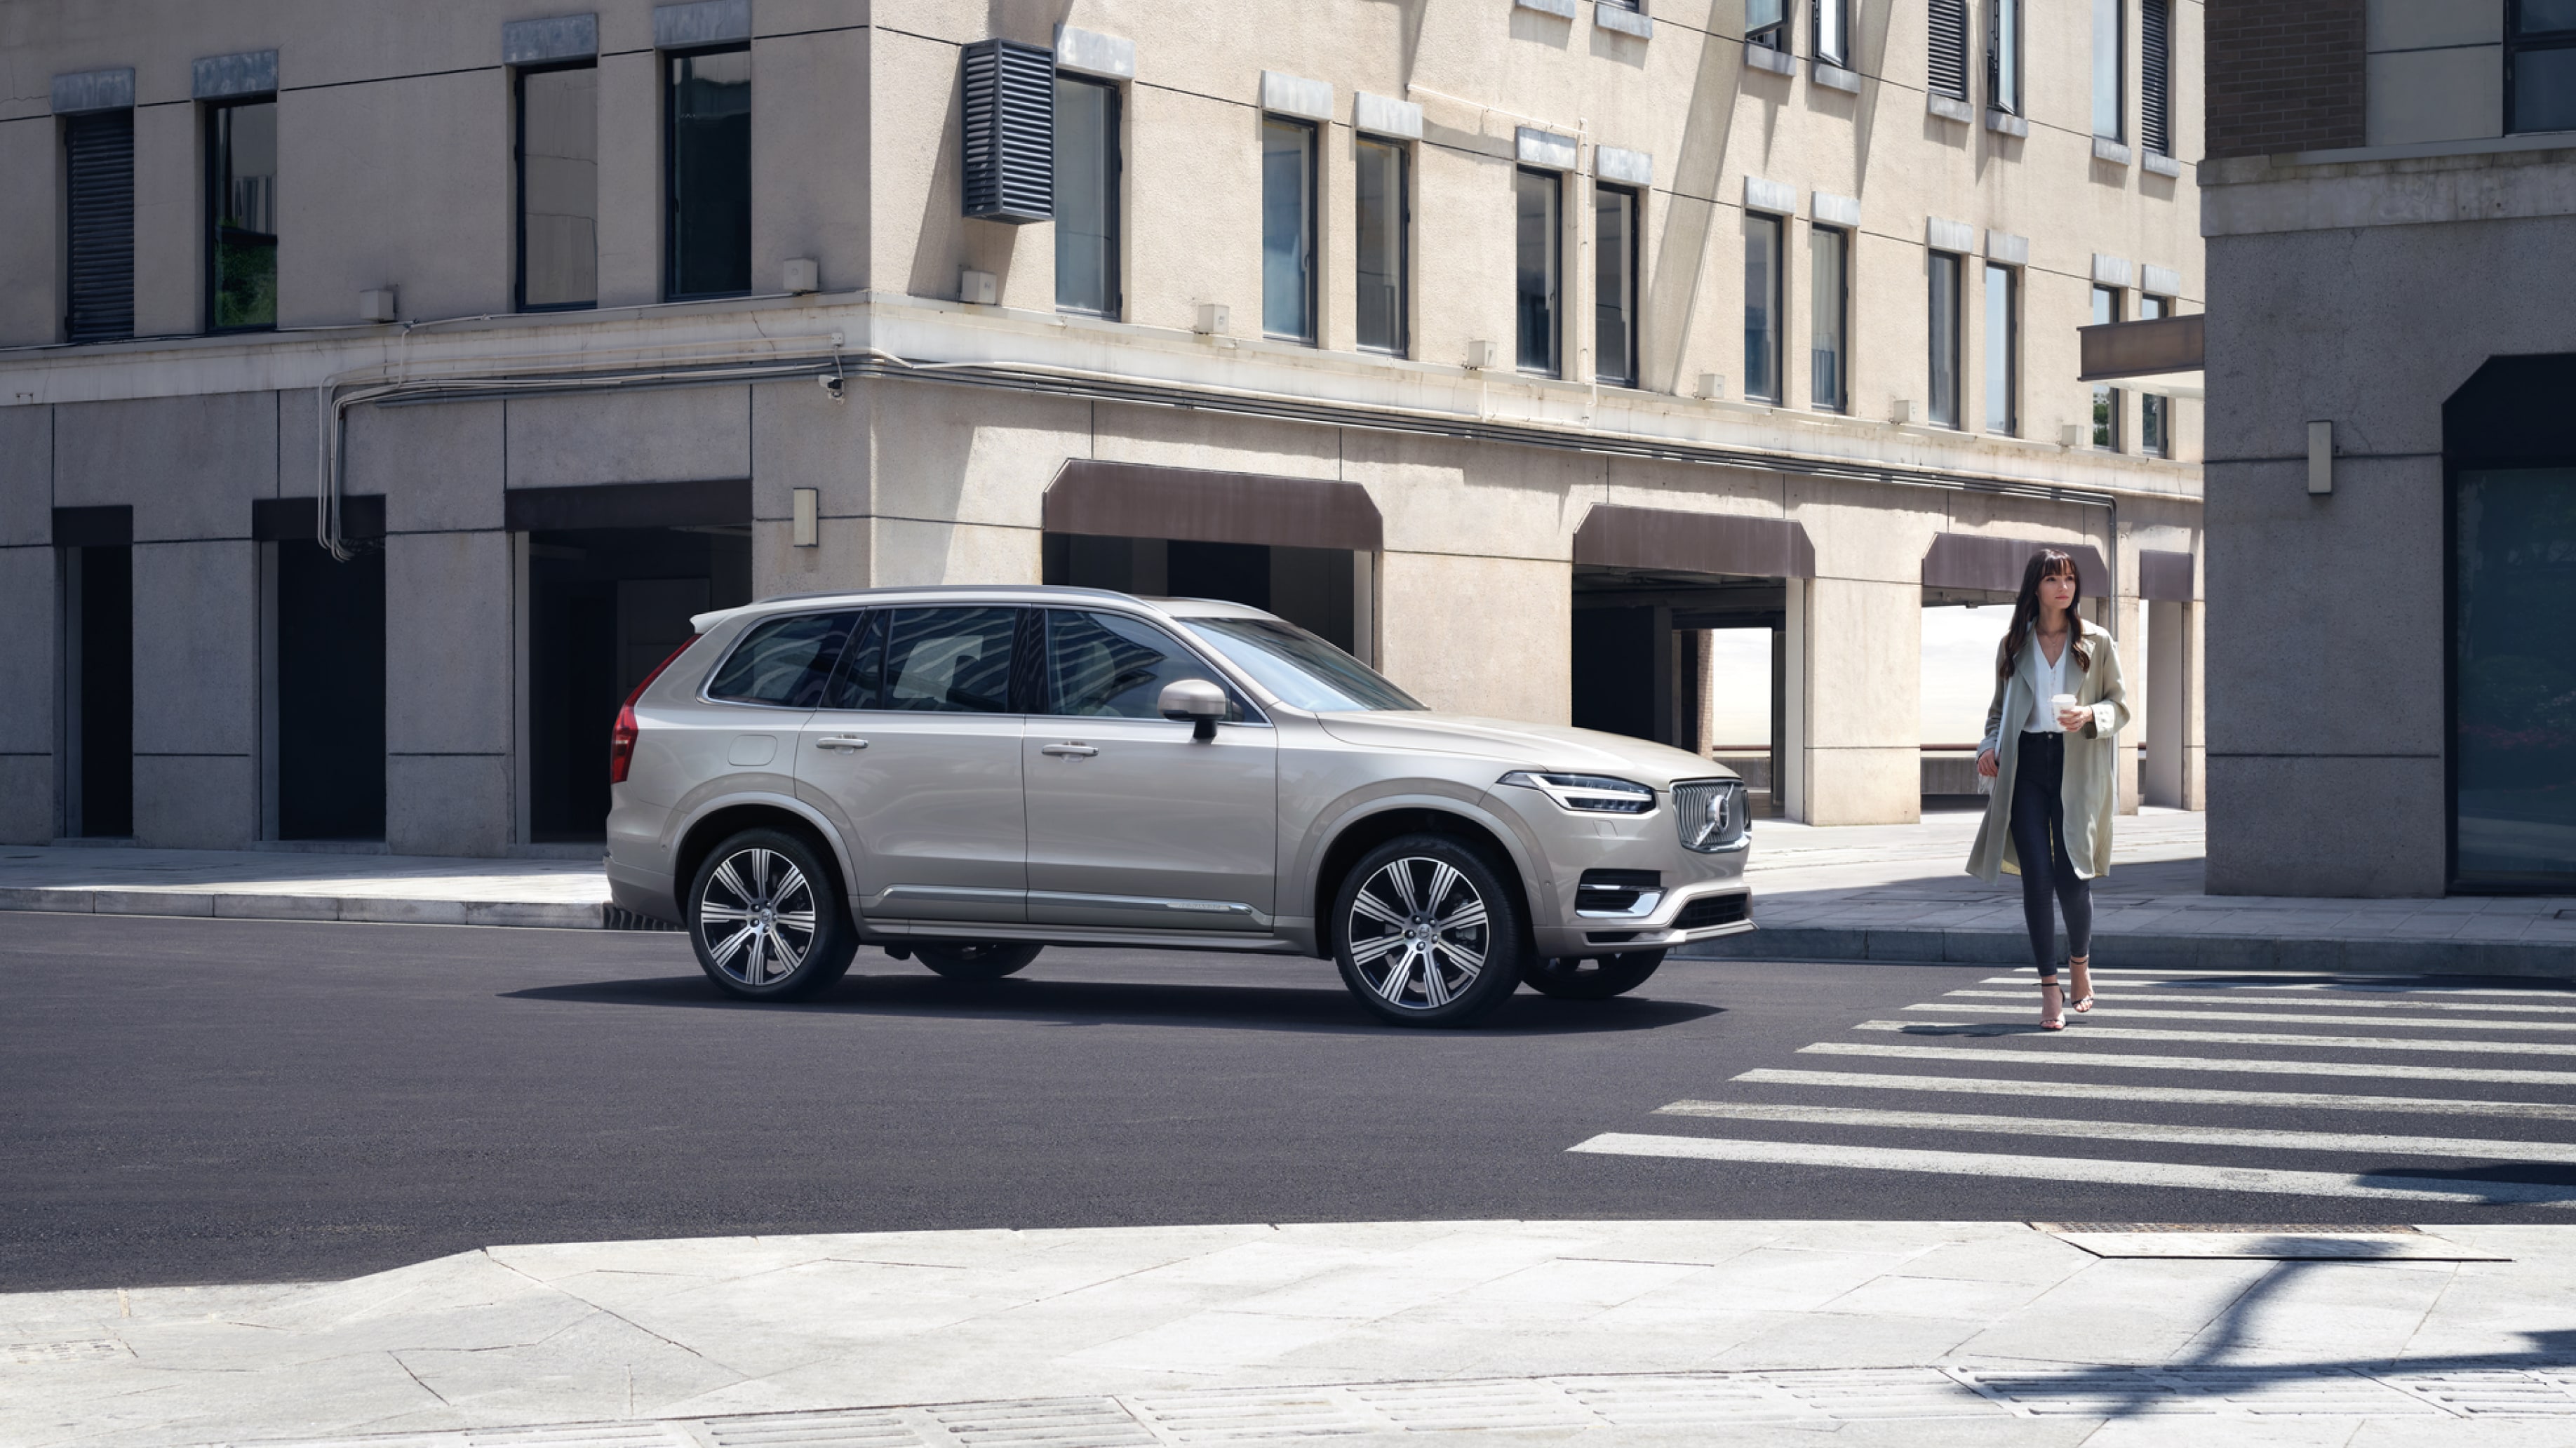 A Volvo XC90 stops at a zebra crossing while a lady with a coffee cup in hand cross.